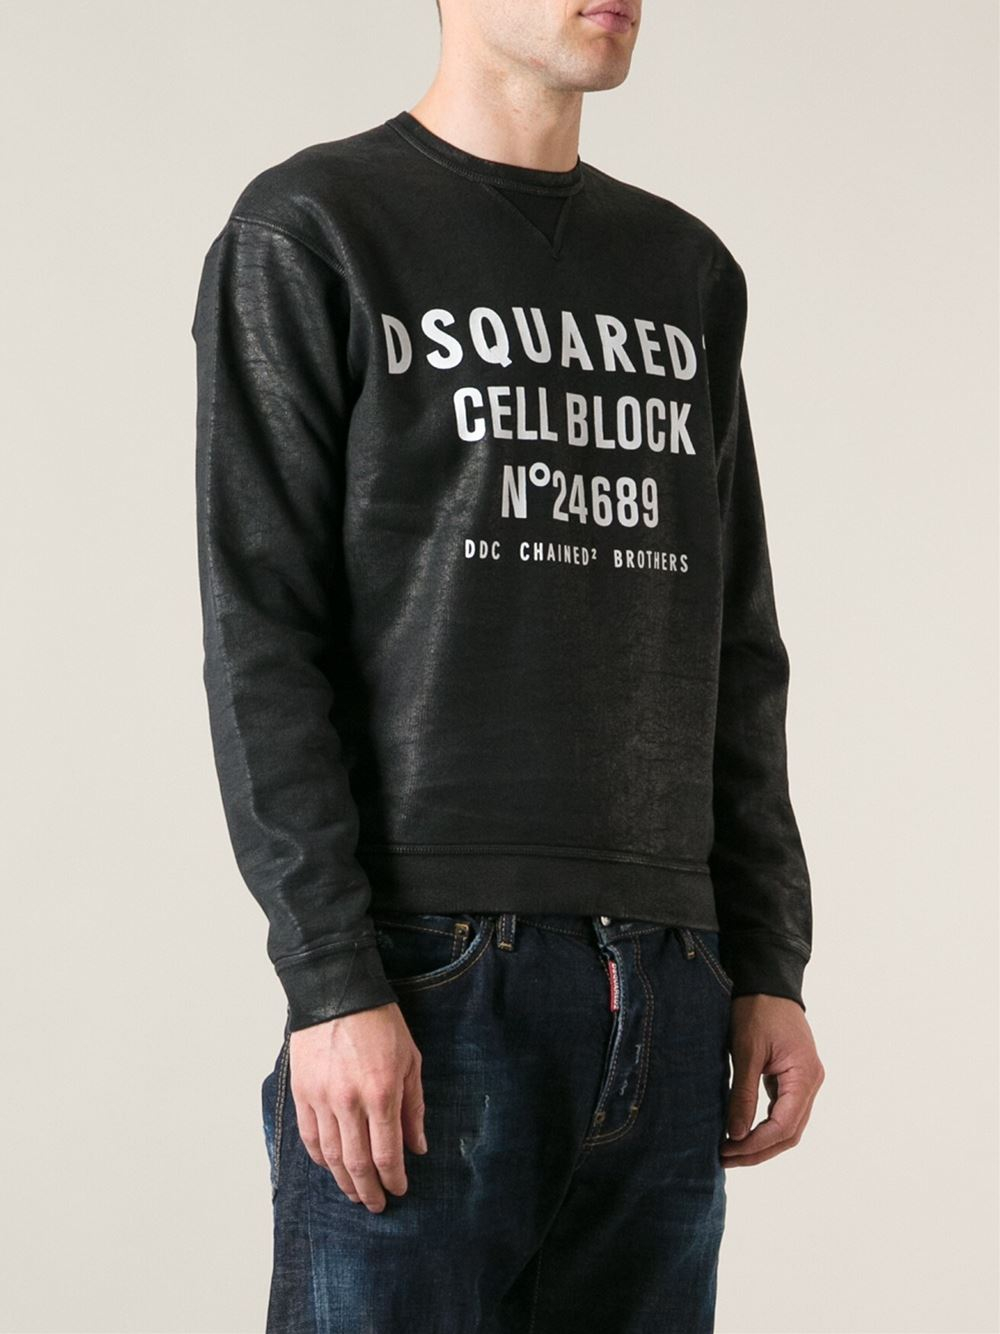 t shirt dsquared2 cell block